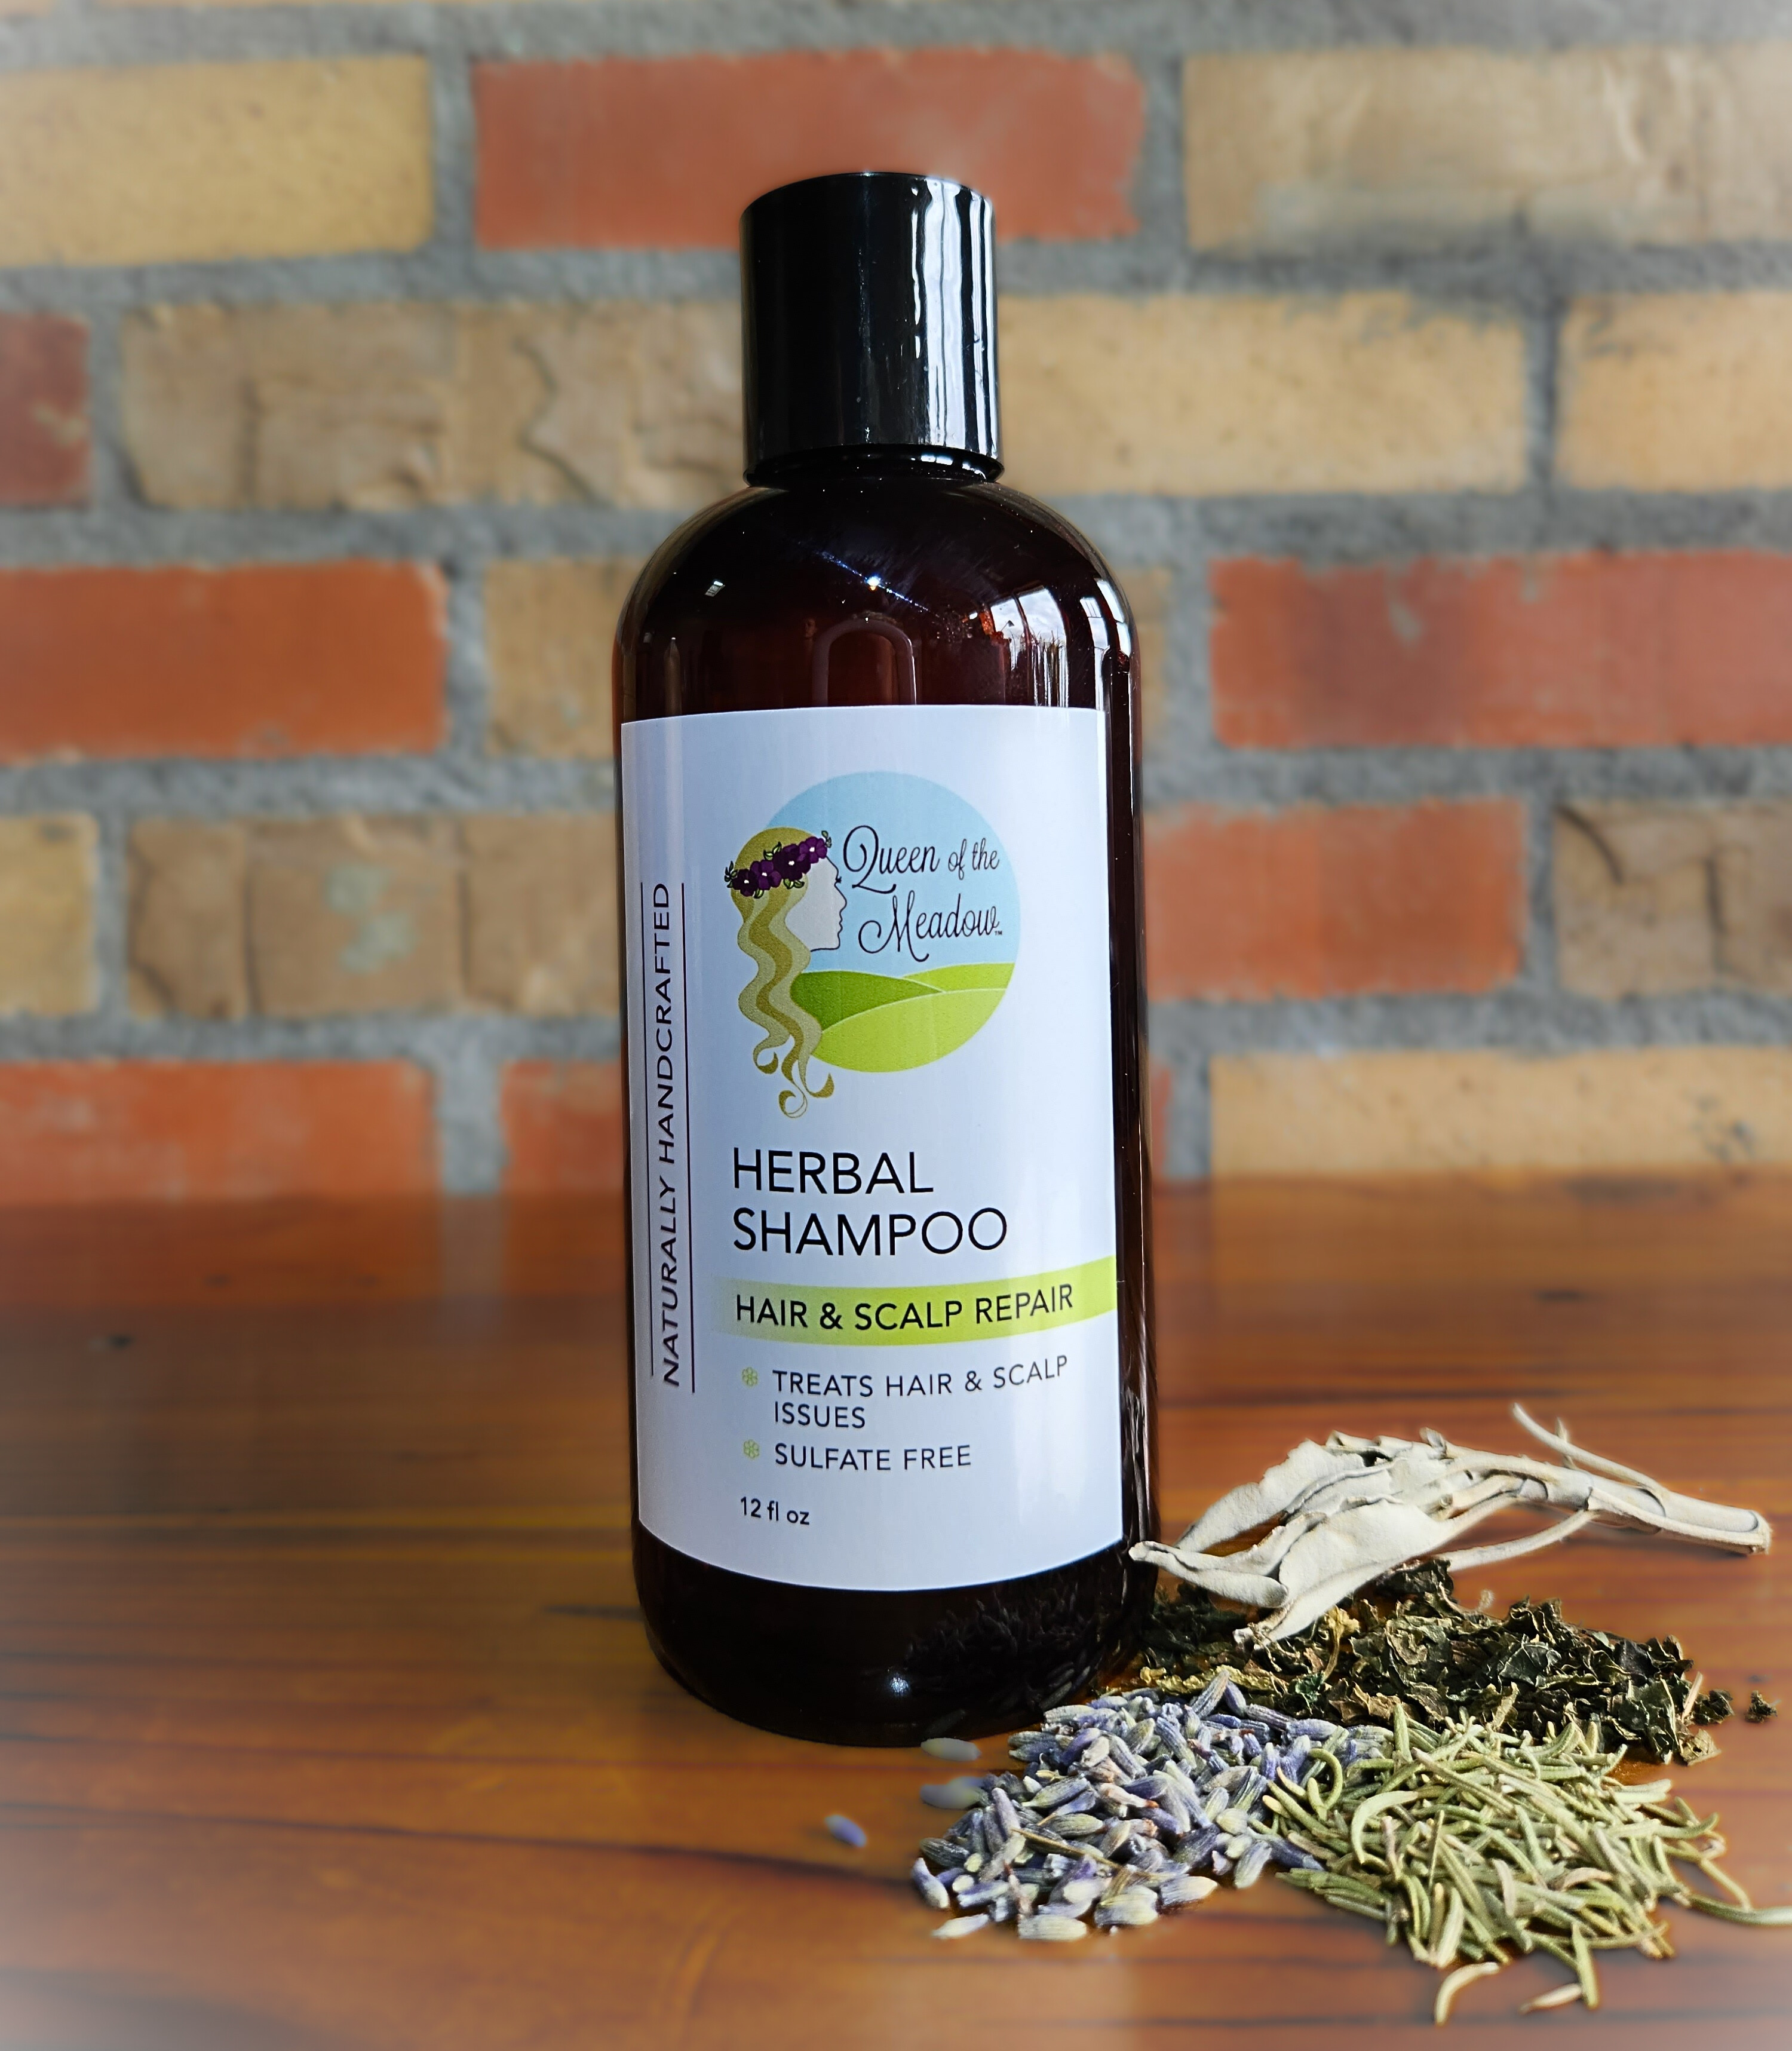 Herbal, SLS free, plant-based shampoo specifically formulated to treat hair and scalp issues. Click image for more information.